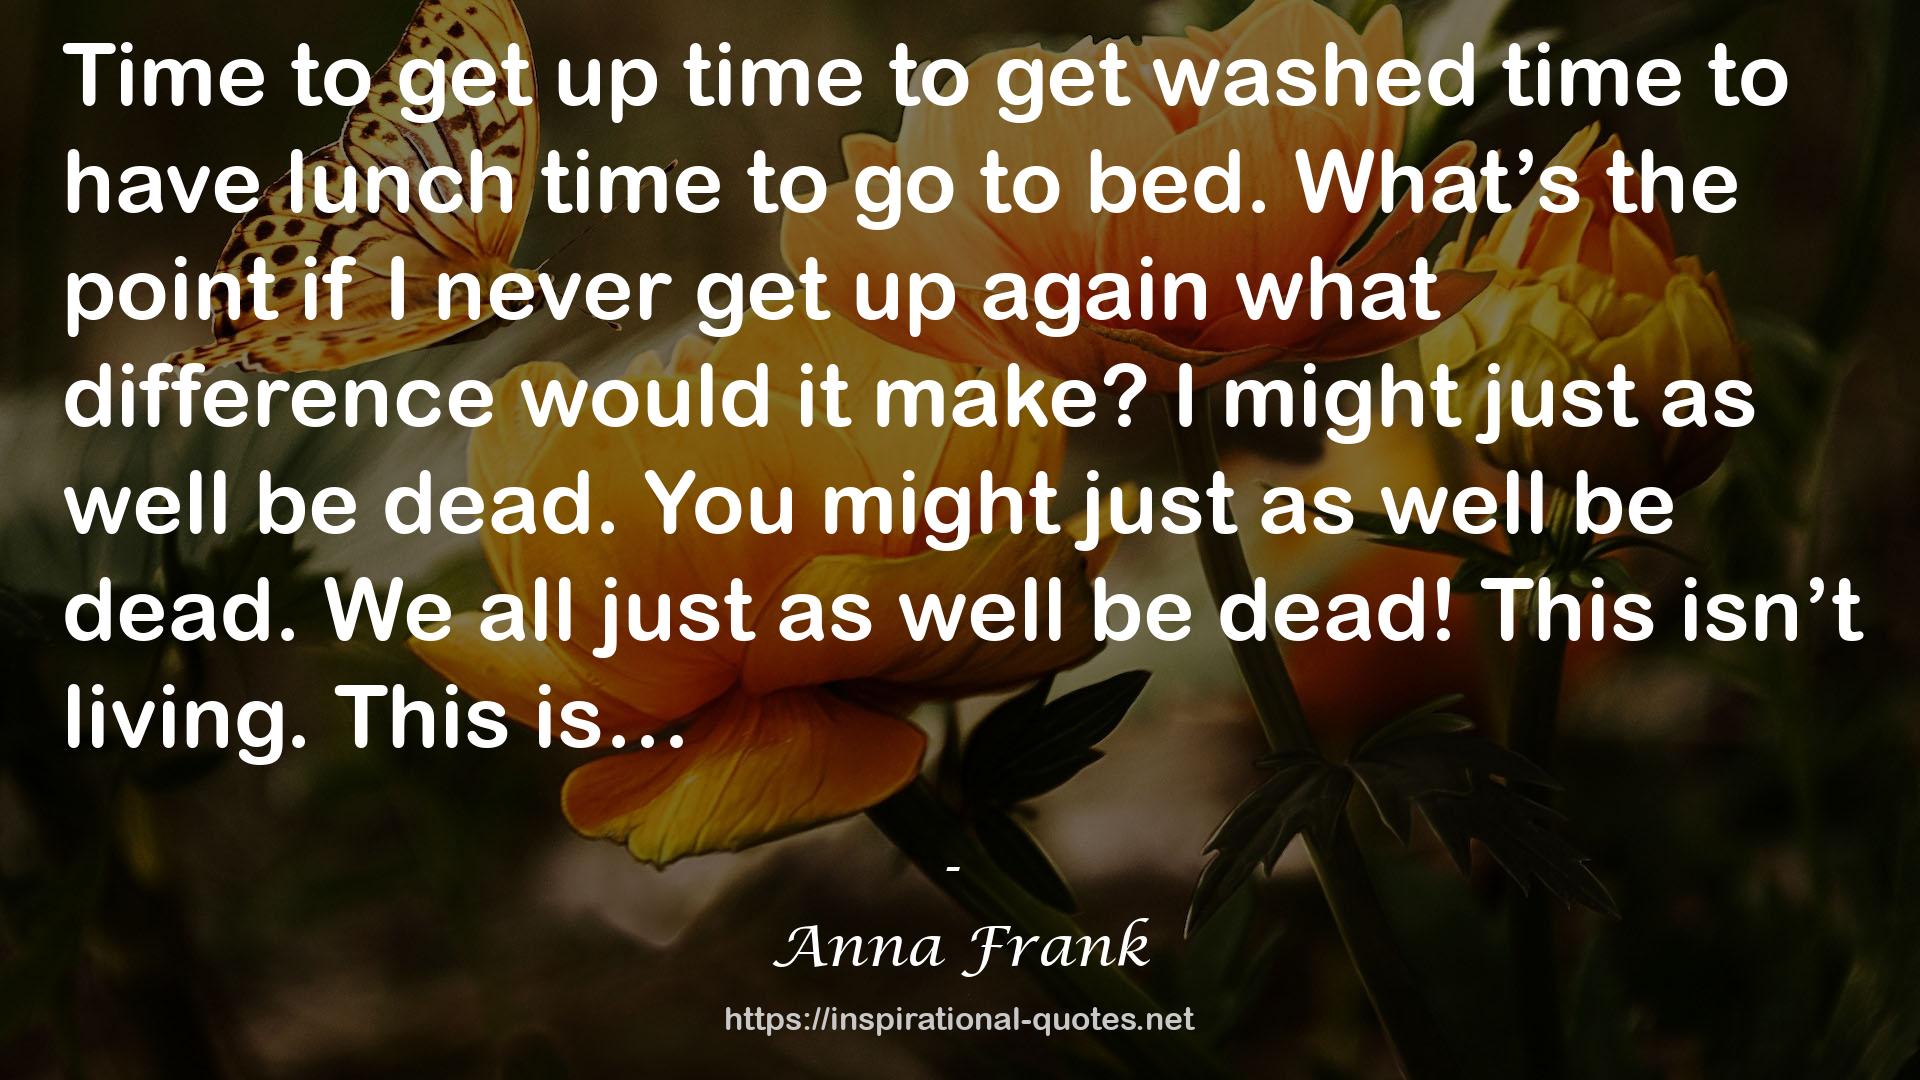 Anna Frank QUOTES